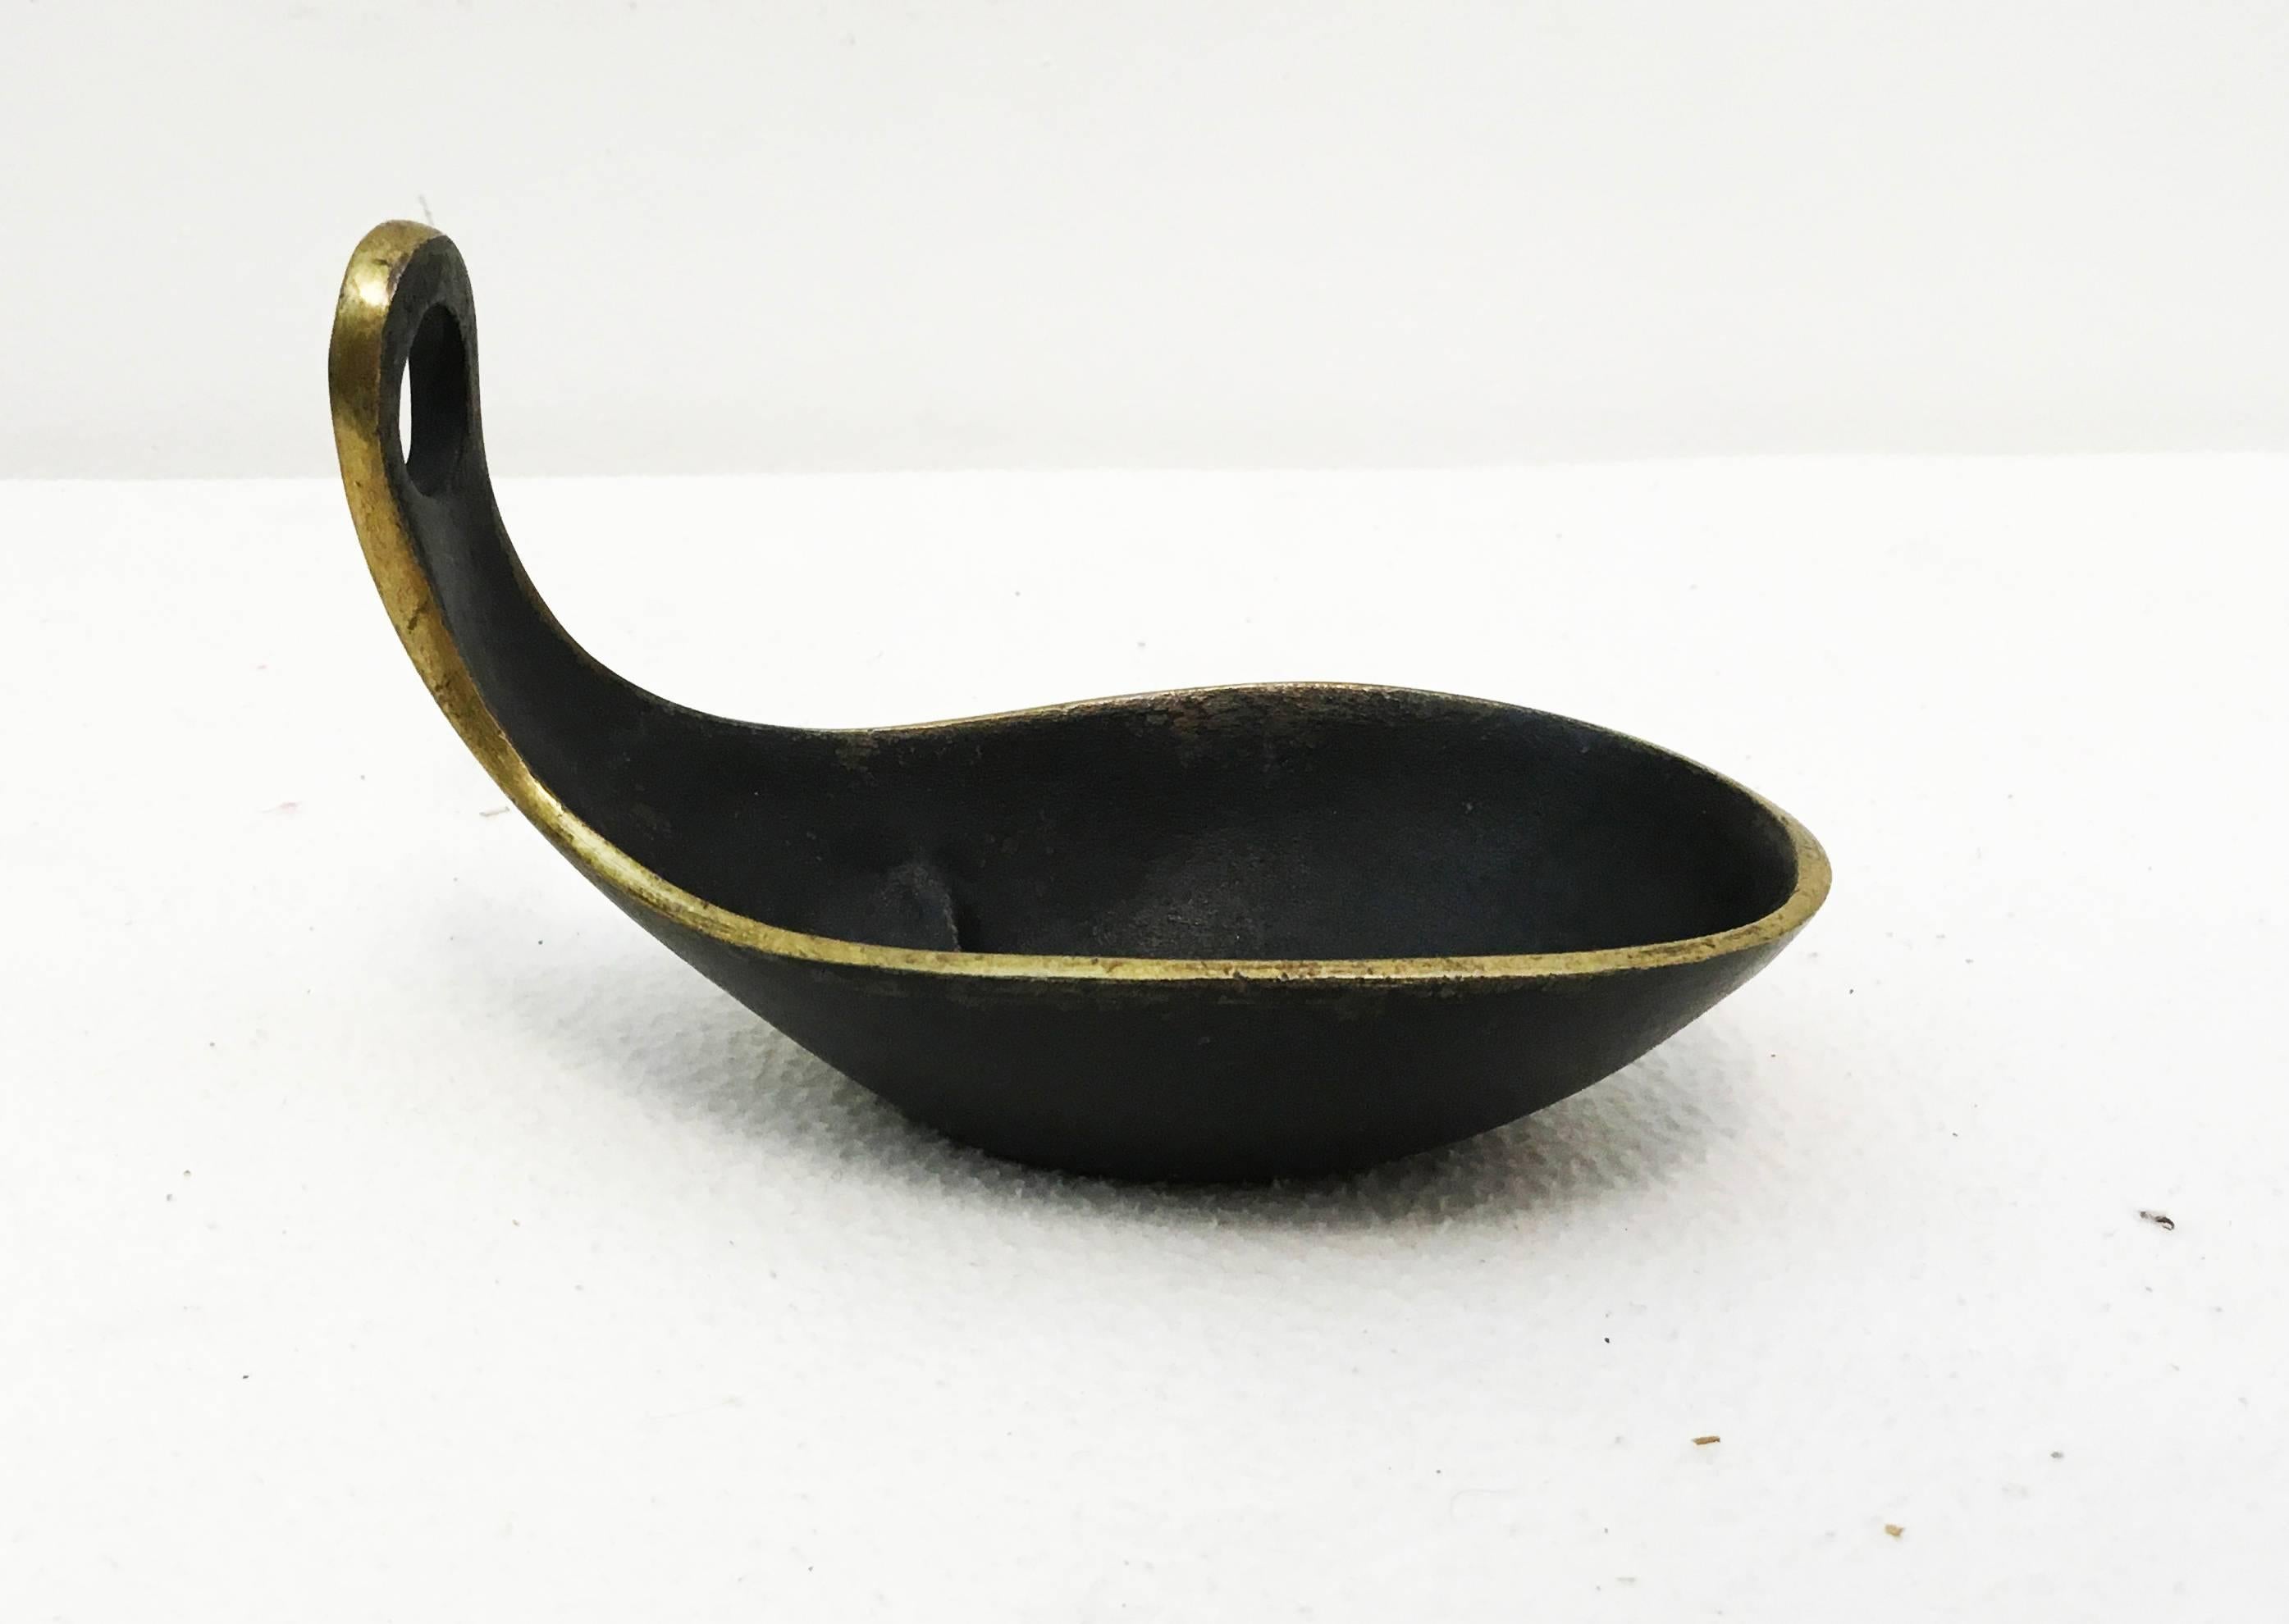 Brass blackened pipe holder manufactured in the 1950s in Austria by Hertha Baller.